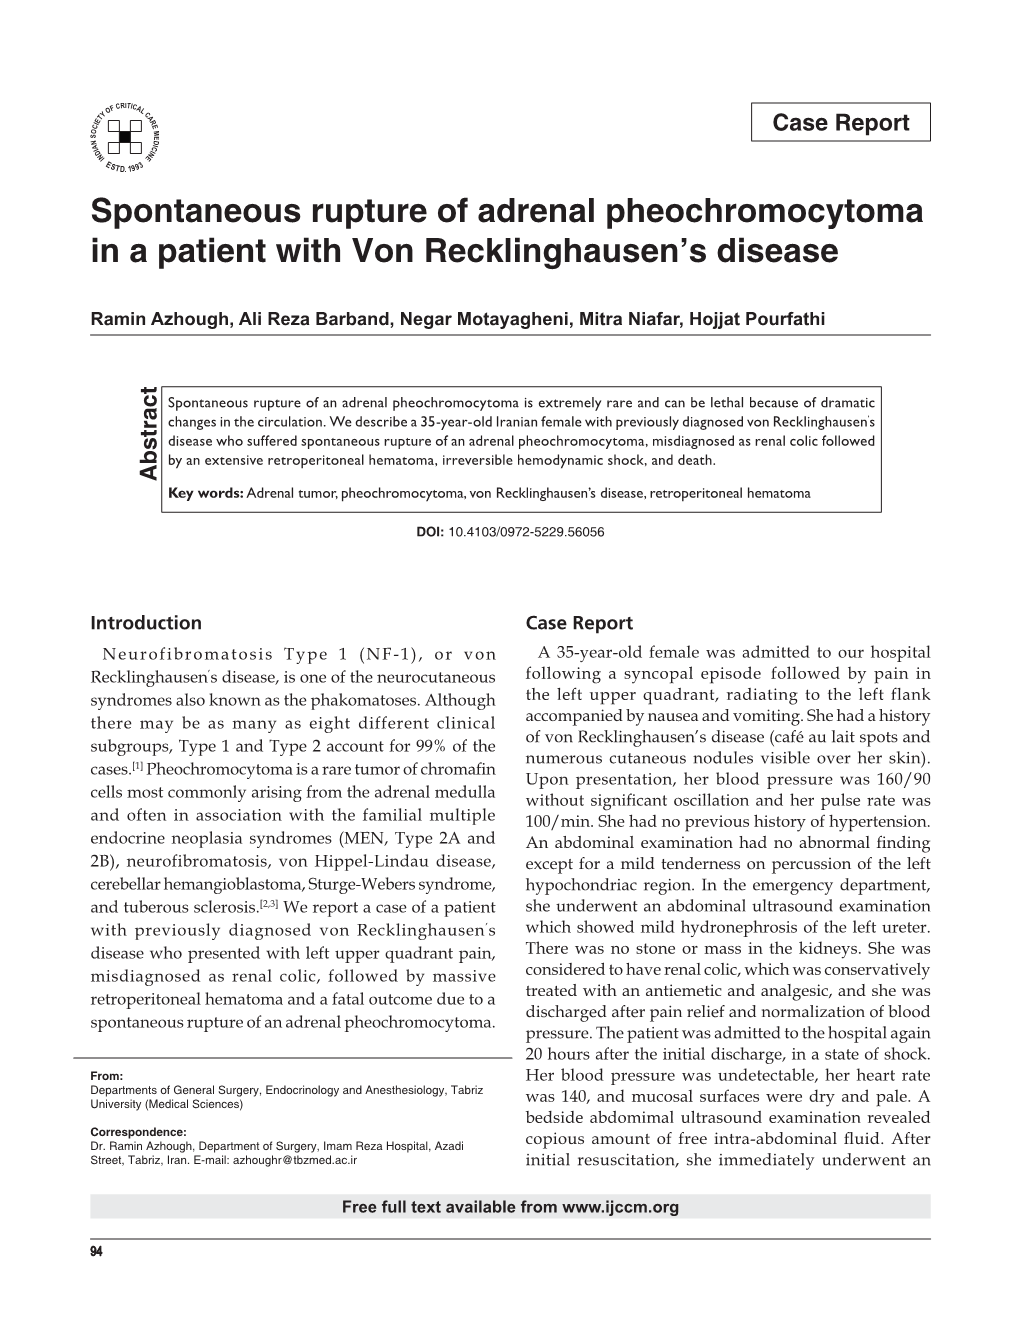 Spontaneous Rupture of Adrenal Pheochromocytoma in a Patient with Von Recklinghausen’S Disease